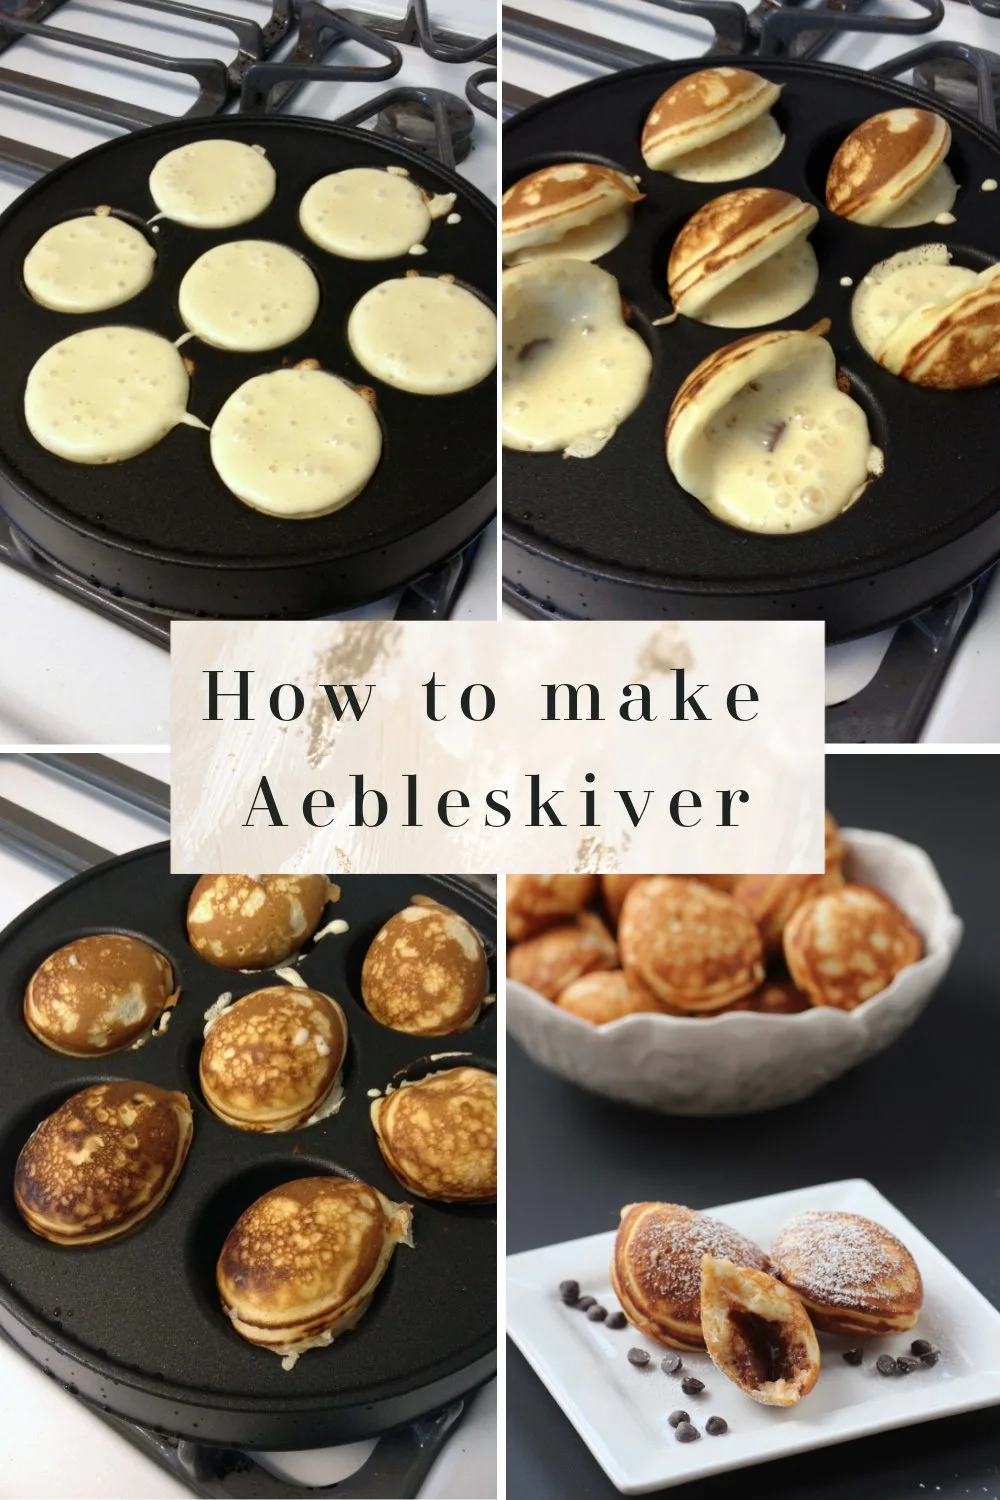 How to make aebleskiver